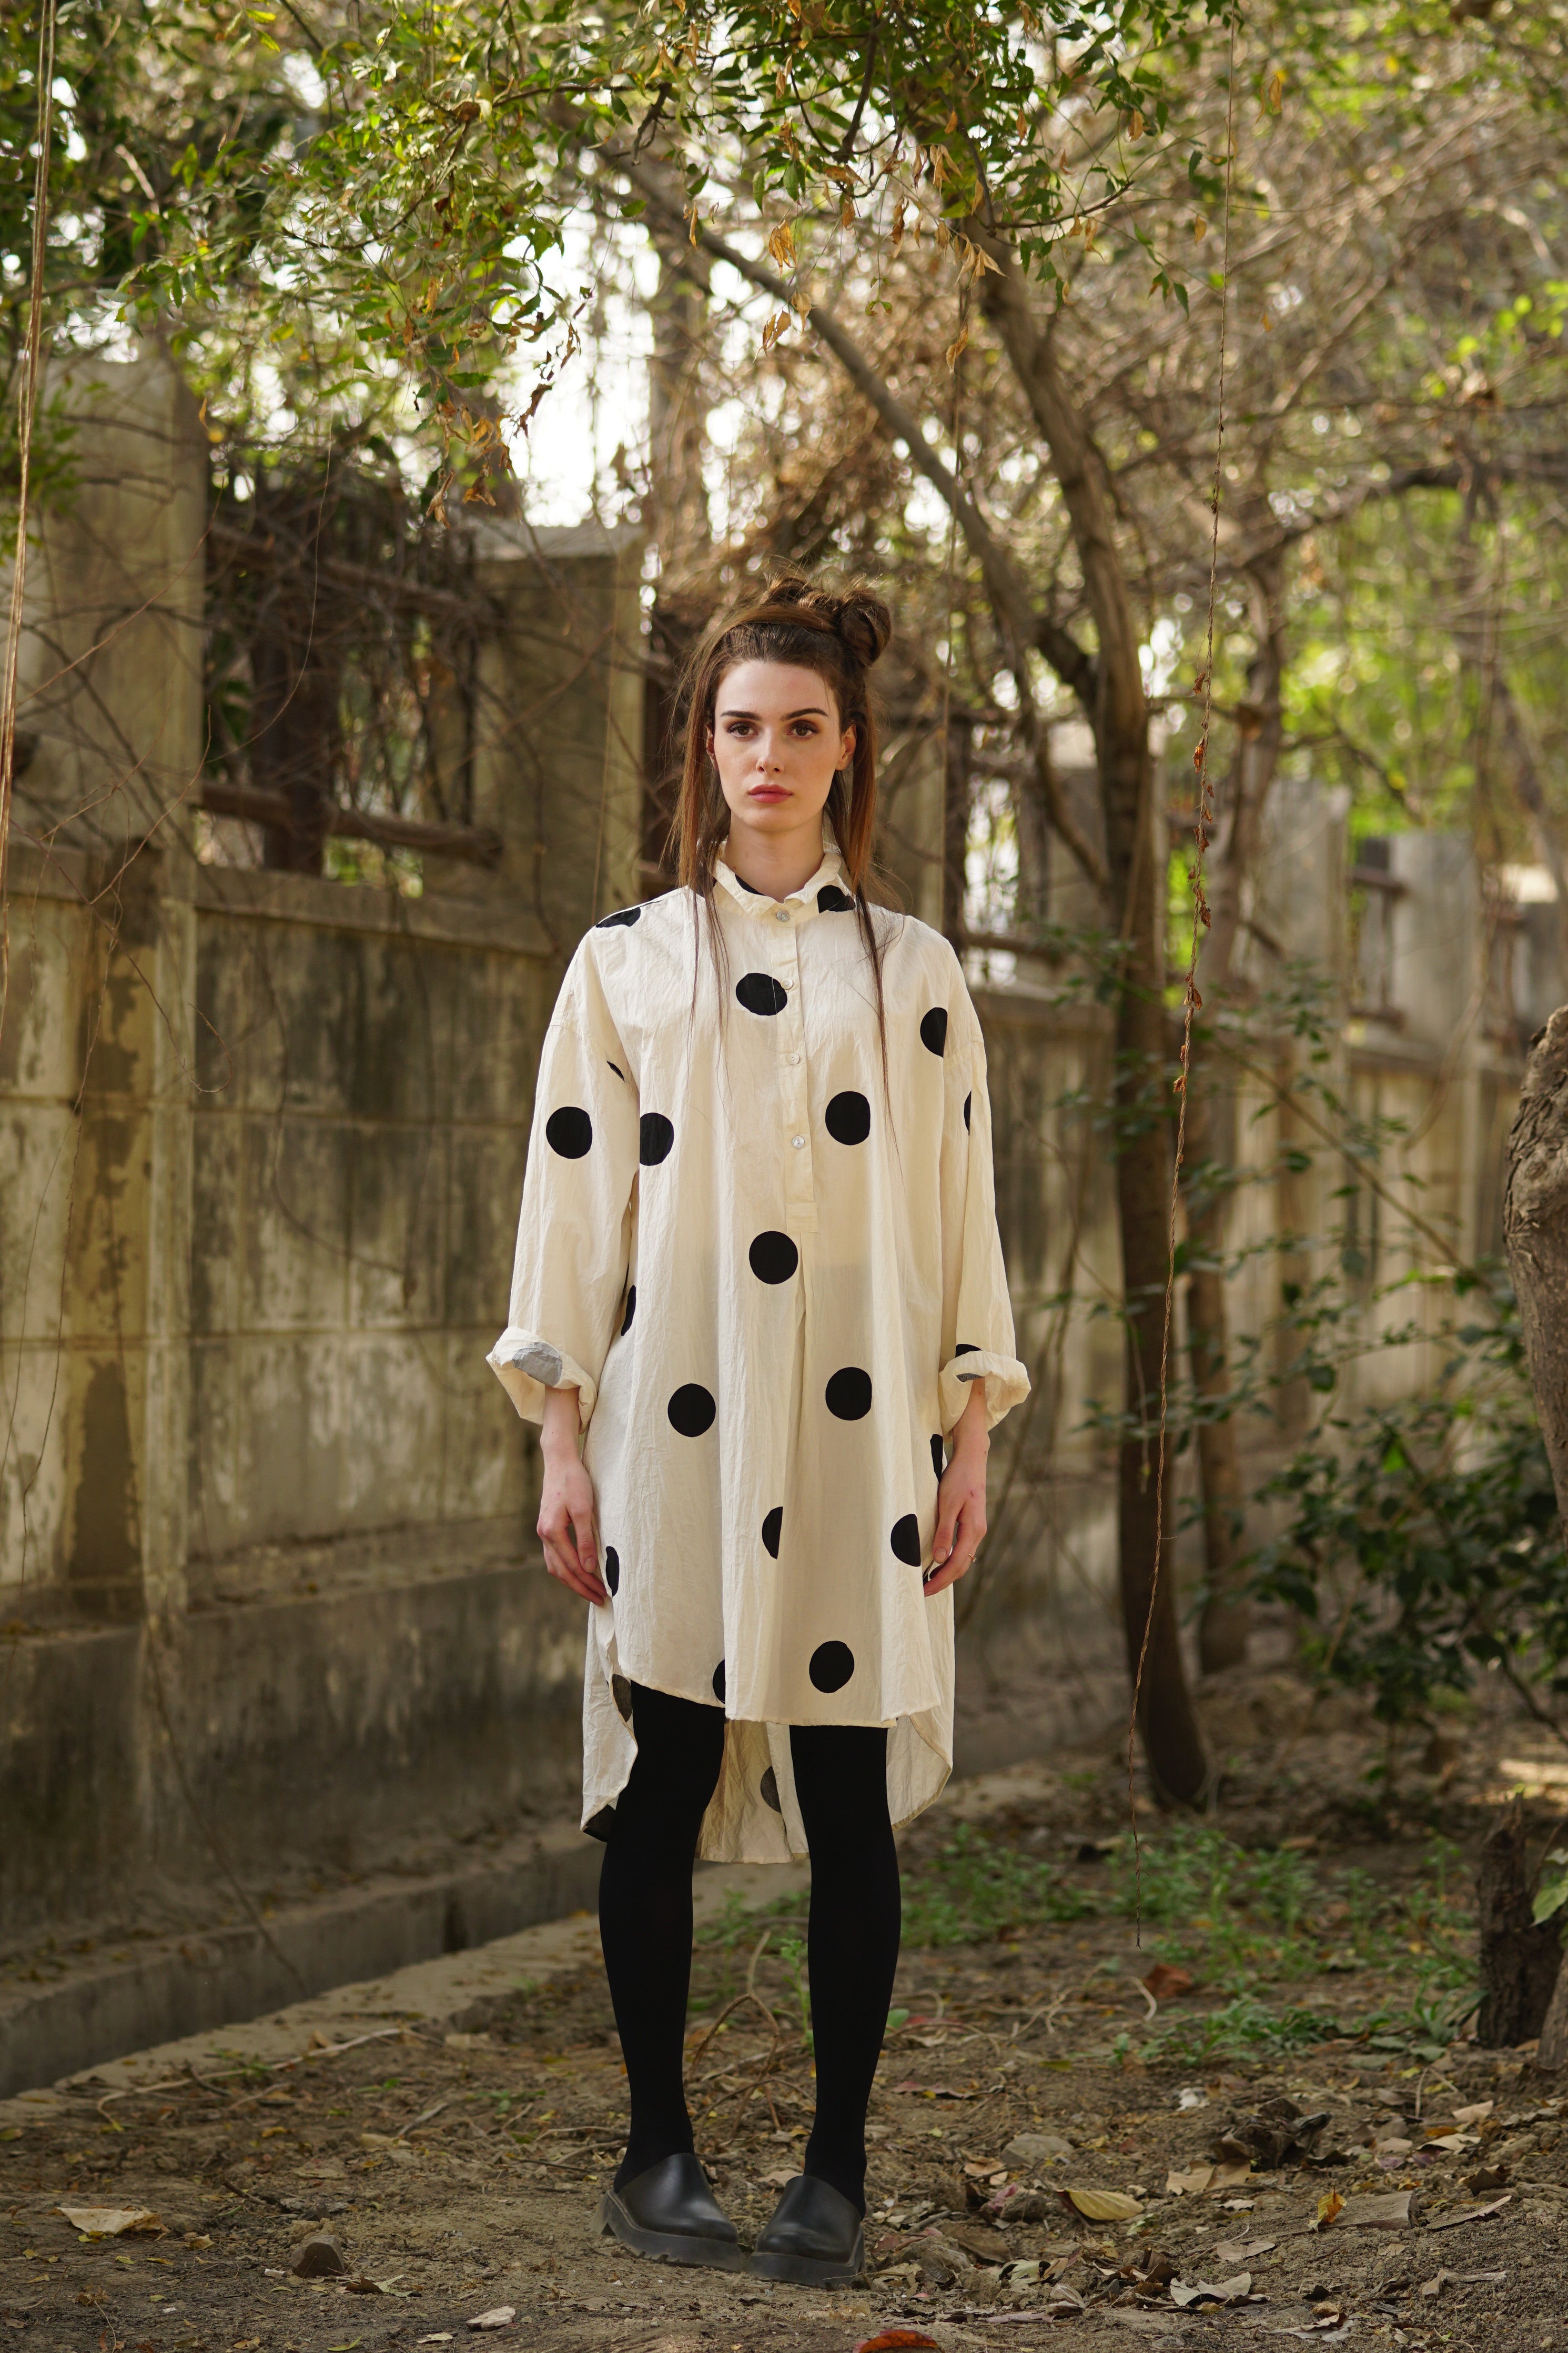 A MegbyDesign model is wearing a classic tuxedo style shirt with black spots made from cotton twill